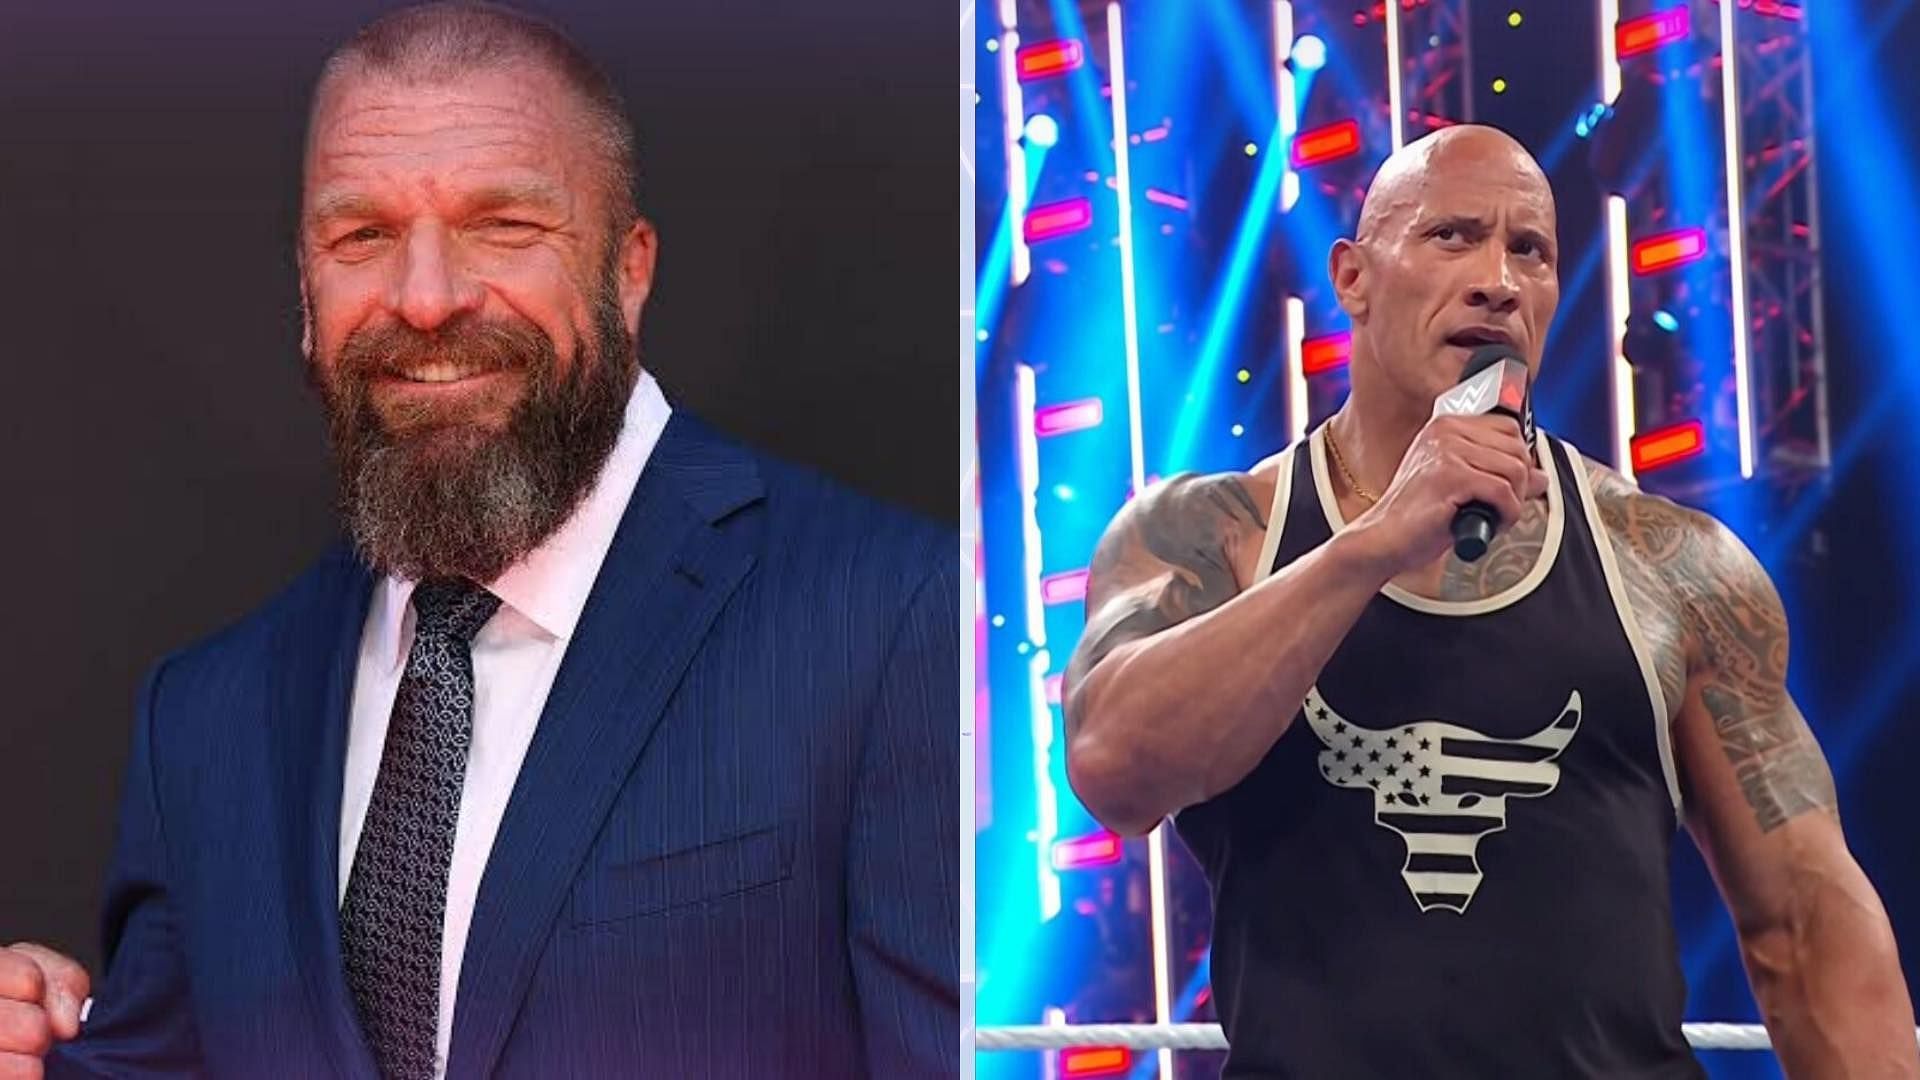 Triple H has a major announcement planned for an upcoming WWE show